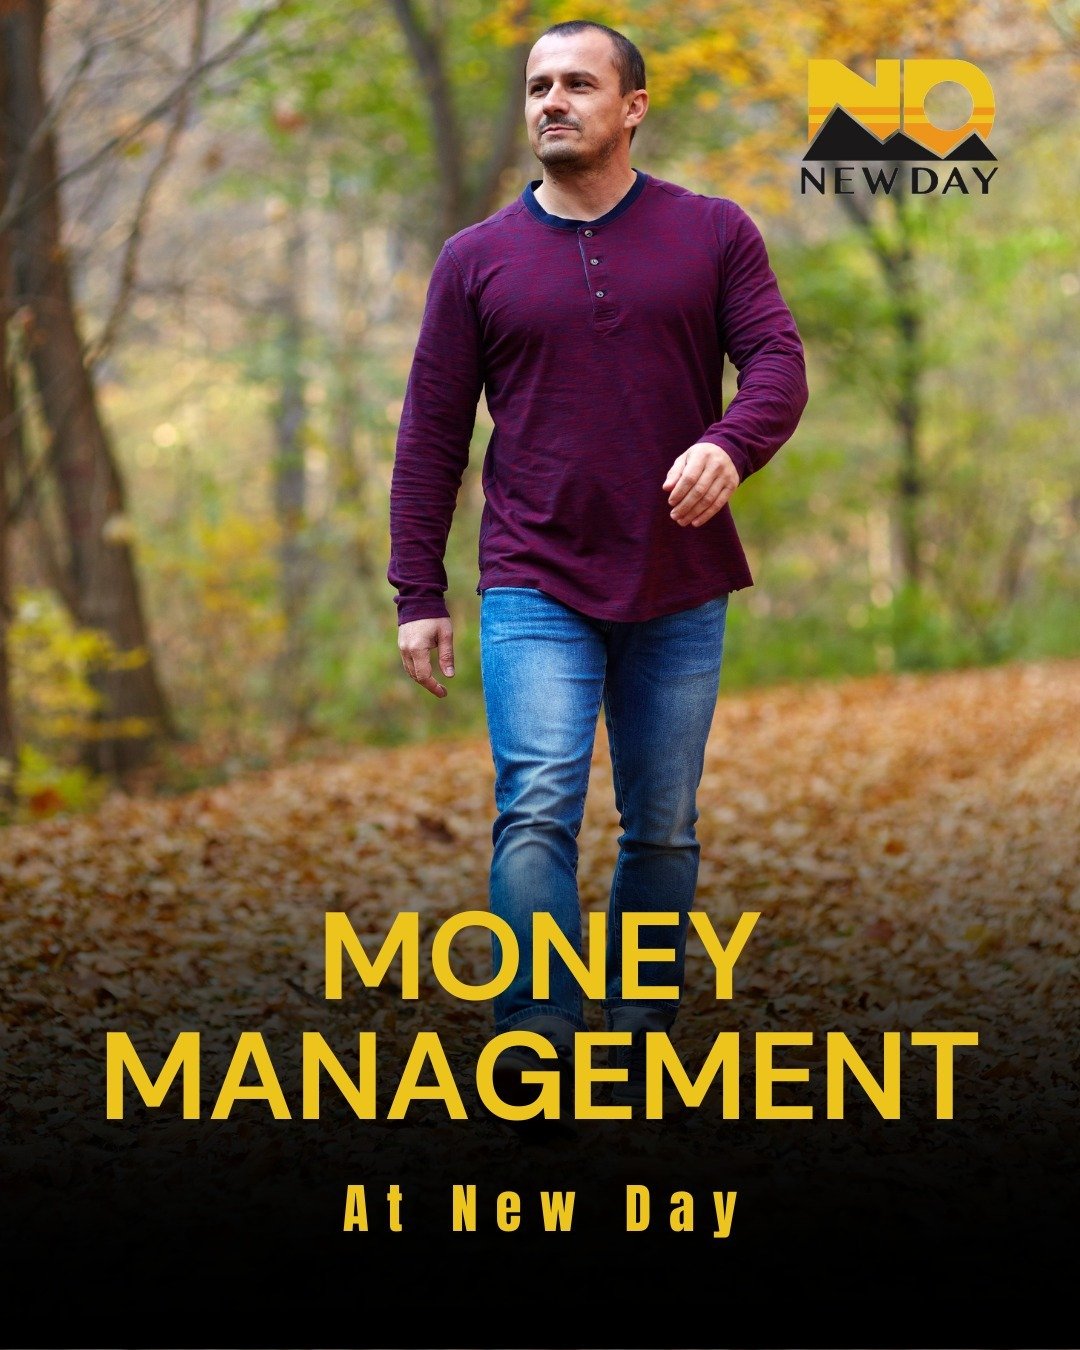 Financial health is key to a fresh start. Learn with us how money management can pave the way for a stable and fulfilling life.

 #freshstart #moneymanagement #health #physicalexercise #start #management #life #financialhealth #fulfillinglife #paveth